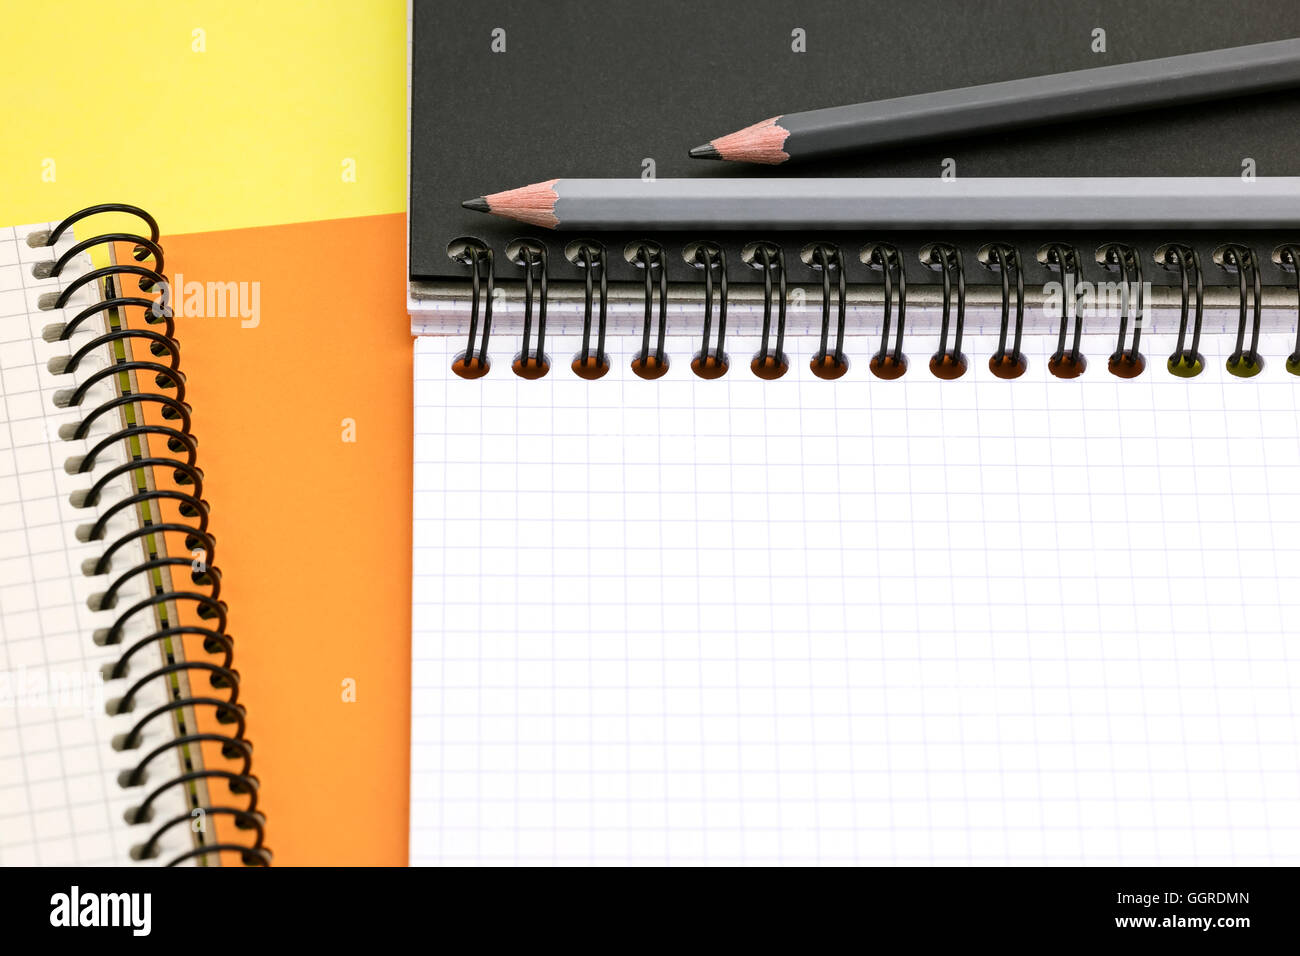 graphite pencils, open multicolor notebooks on yellow surface background closeup Stock Photo